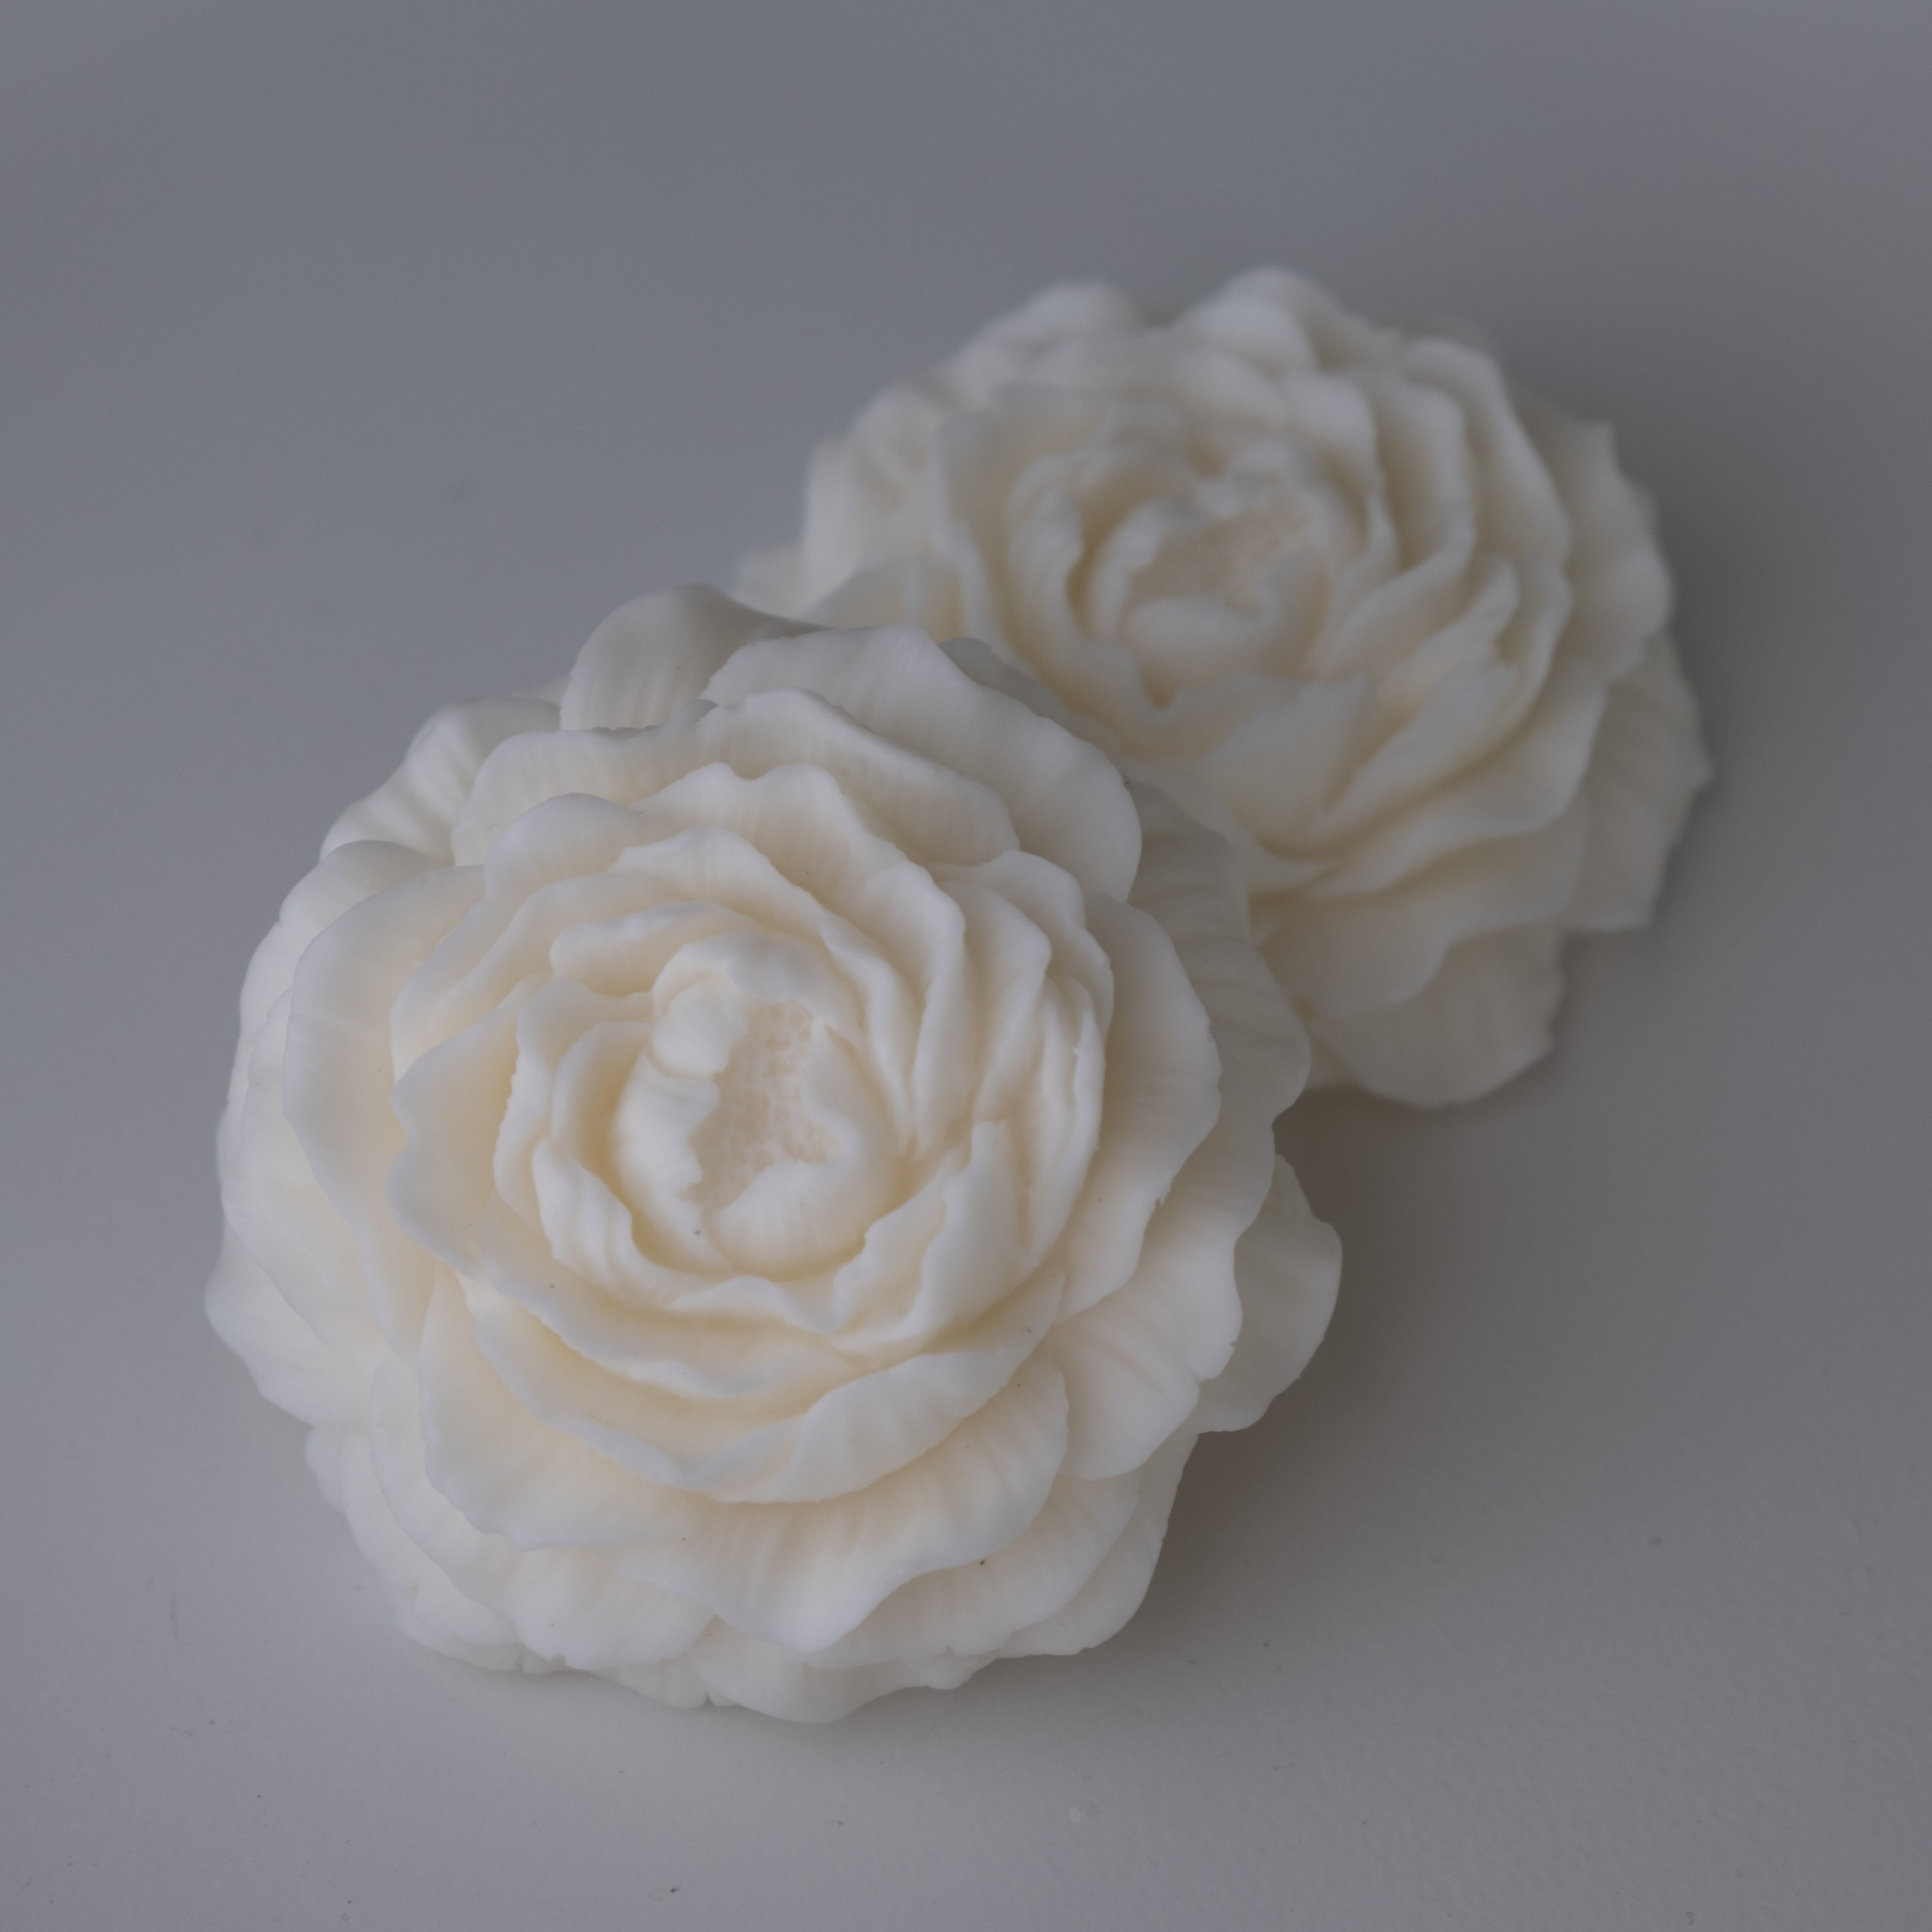 Peony Candle Mould 0 - Silicone Mould, Mold for DIY Candles. Created using candle making kit with cotton candle wicks and candle colour chips. Using soy wax for pillar candles. Sold by Myka Candles Moulds Australia